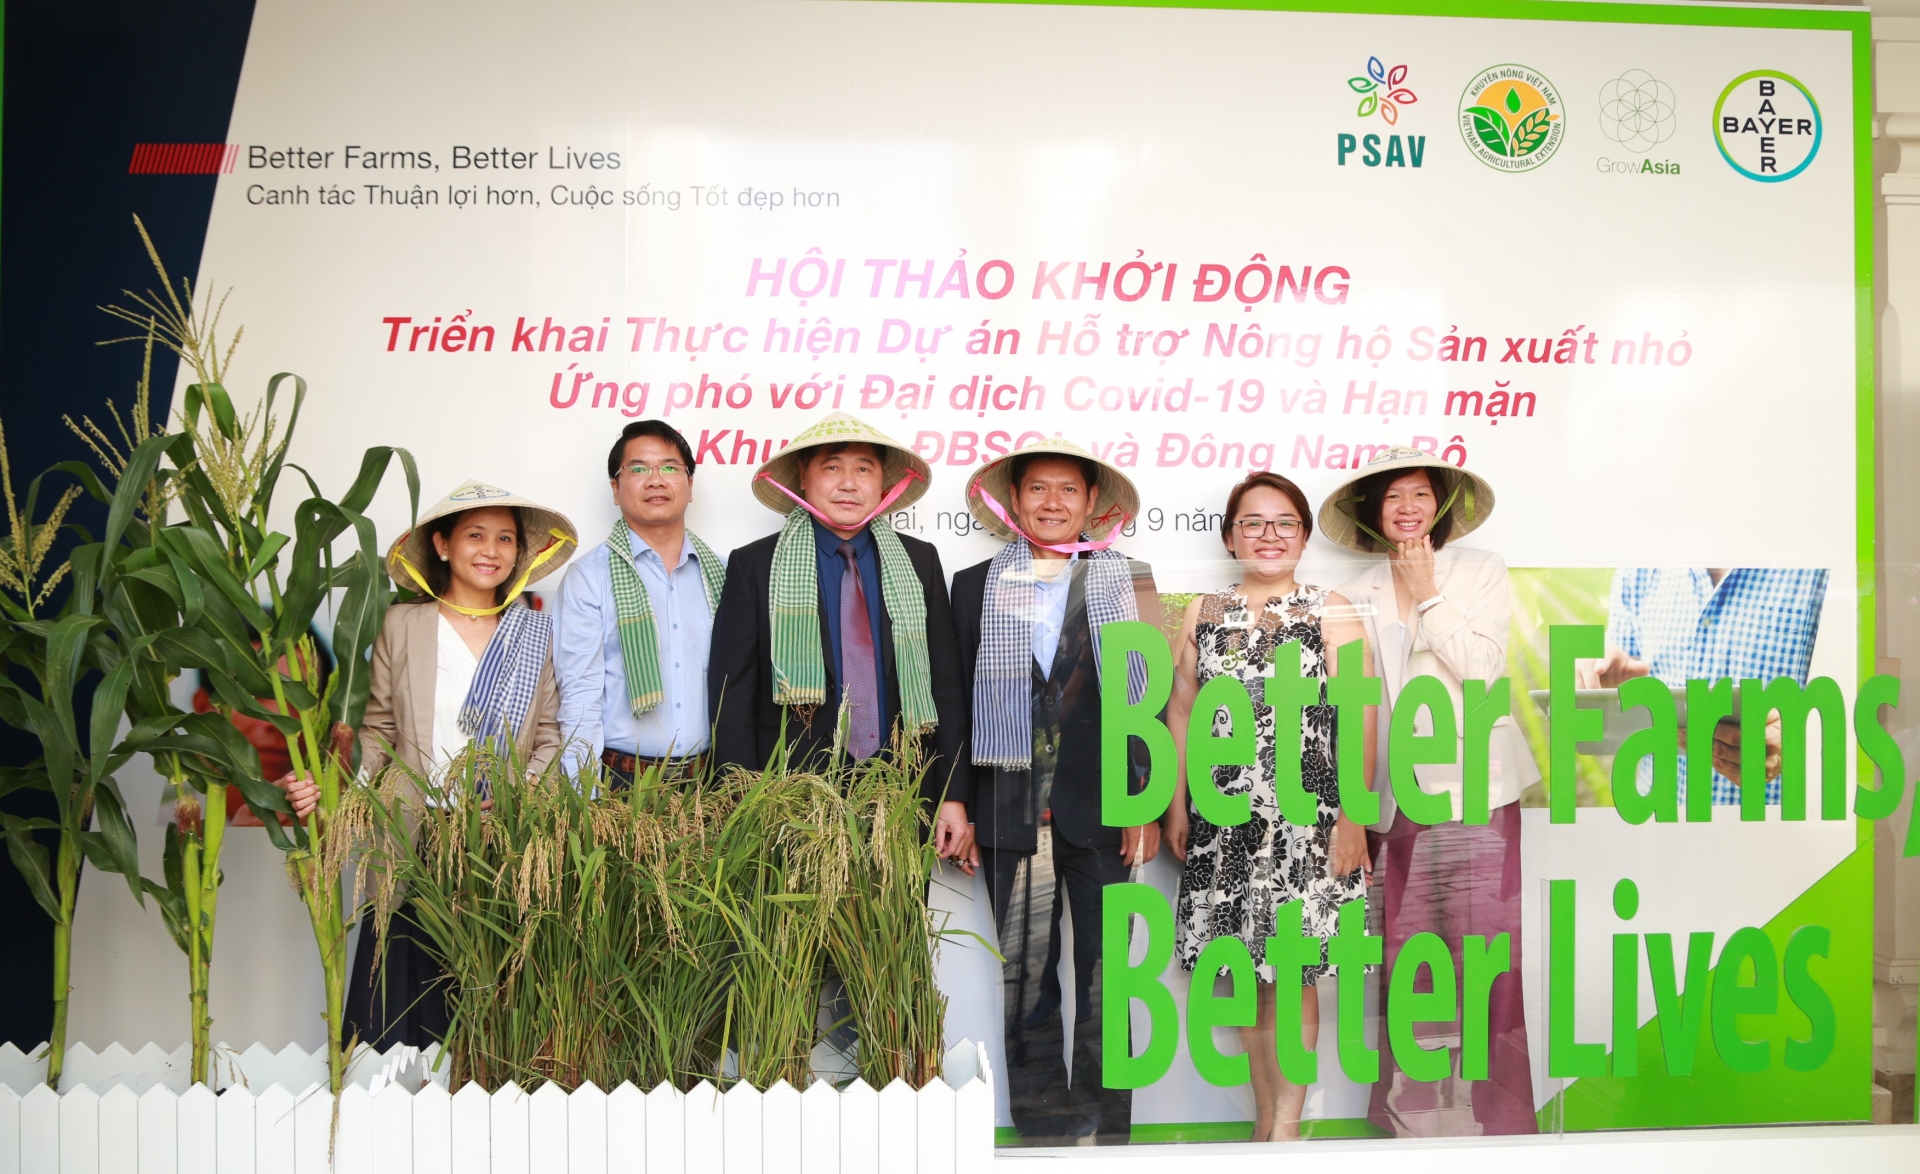 Mekong Delta smallholder farmers to receive COVID-19, drought, and saline intrusion support